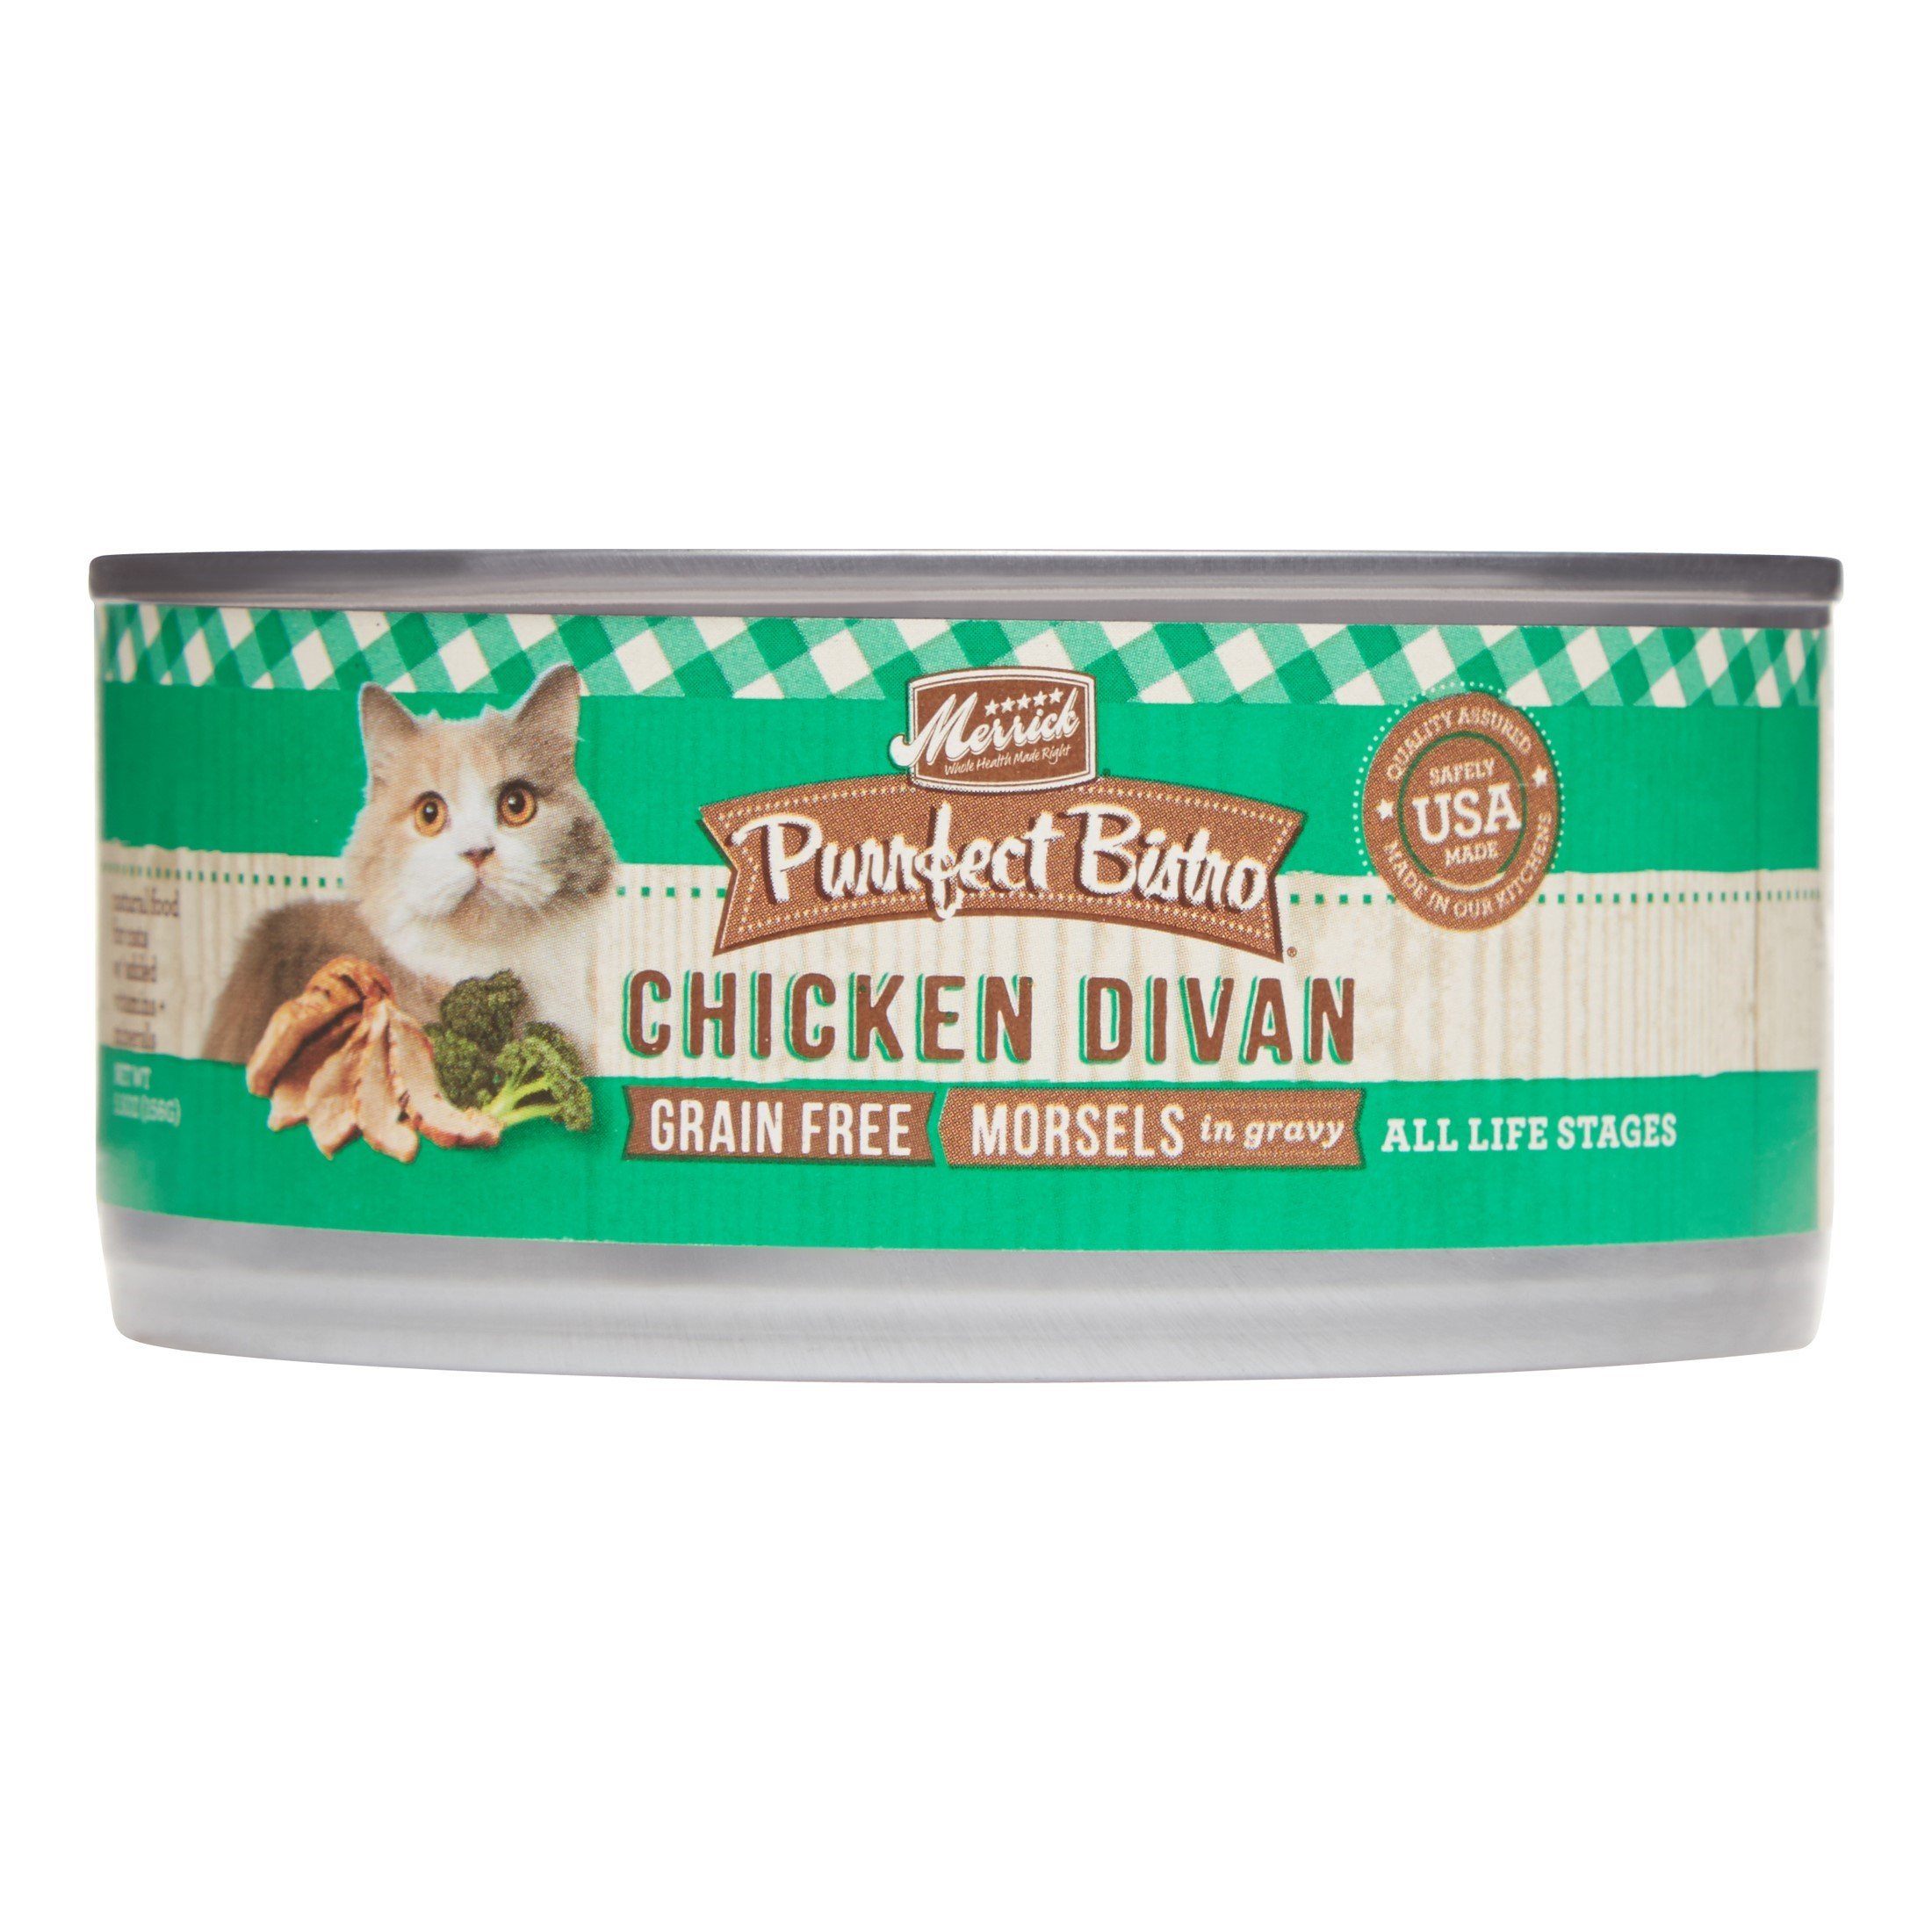 Merrick Purrfect Bistro Grain Free Chicken Divan Canned Cat Food - 5.5 oz Cans - Case of 24  